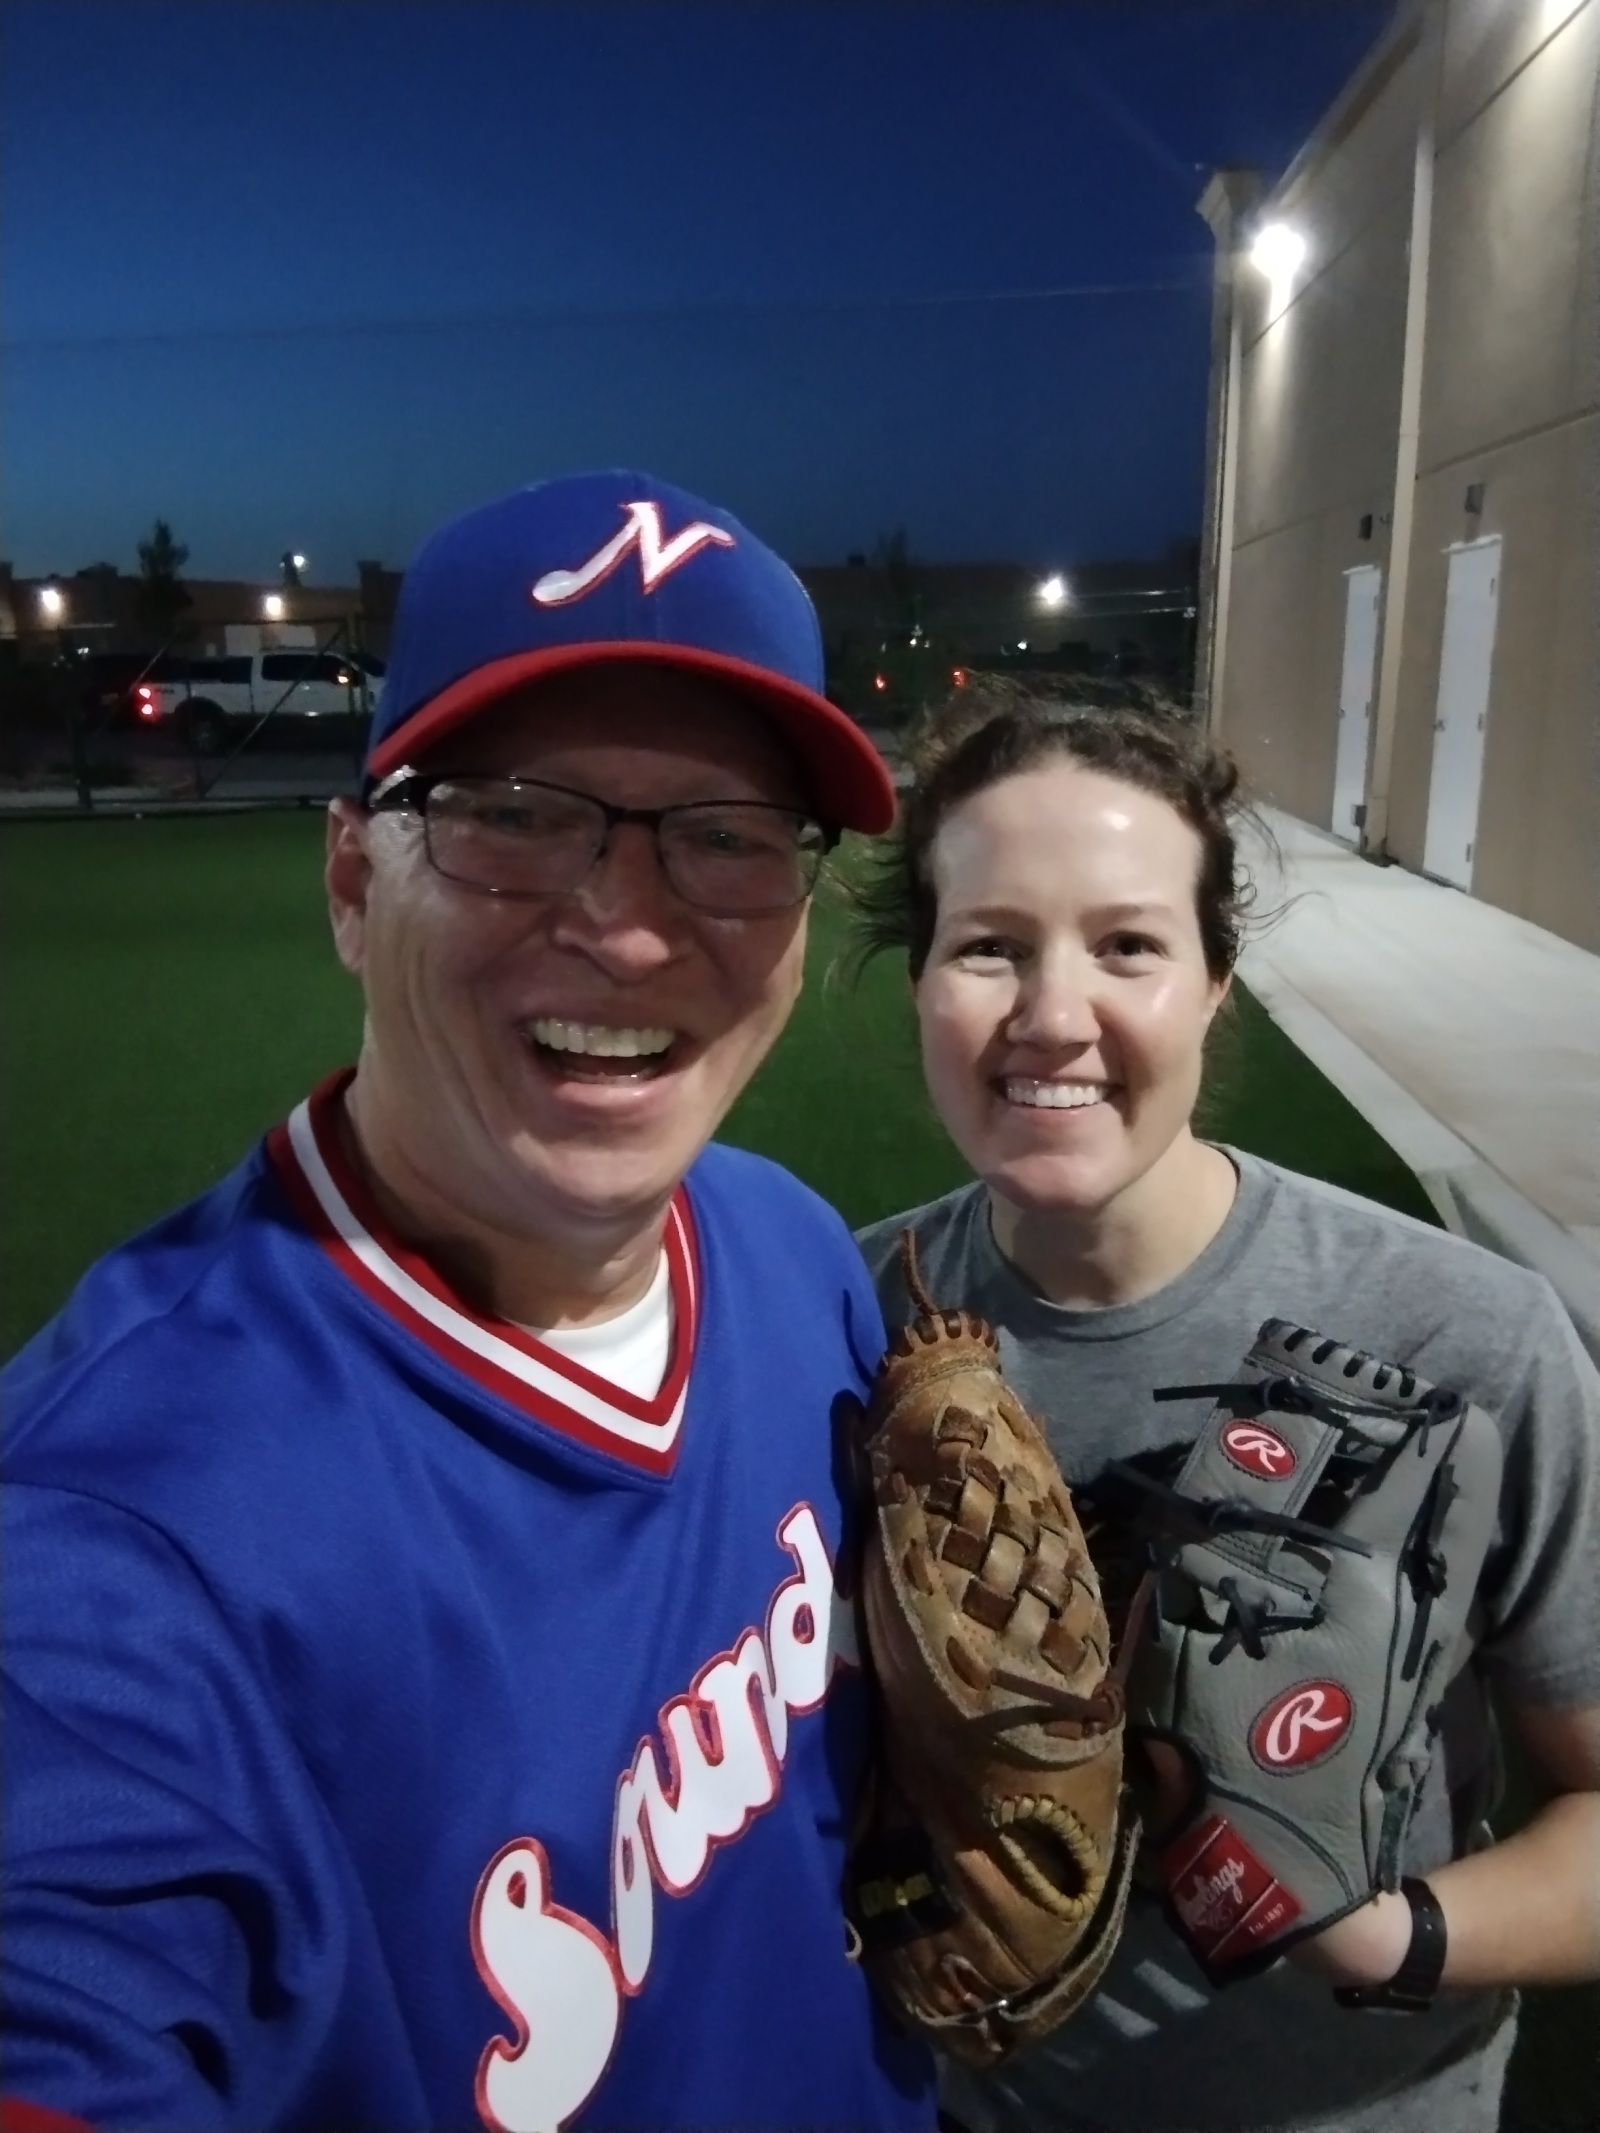 Author Ethan Bryan, left, and Anna Di Tommaso pose for a selfie after a game of catch.